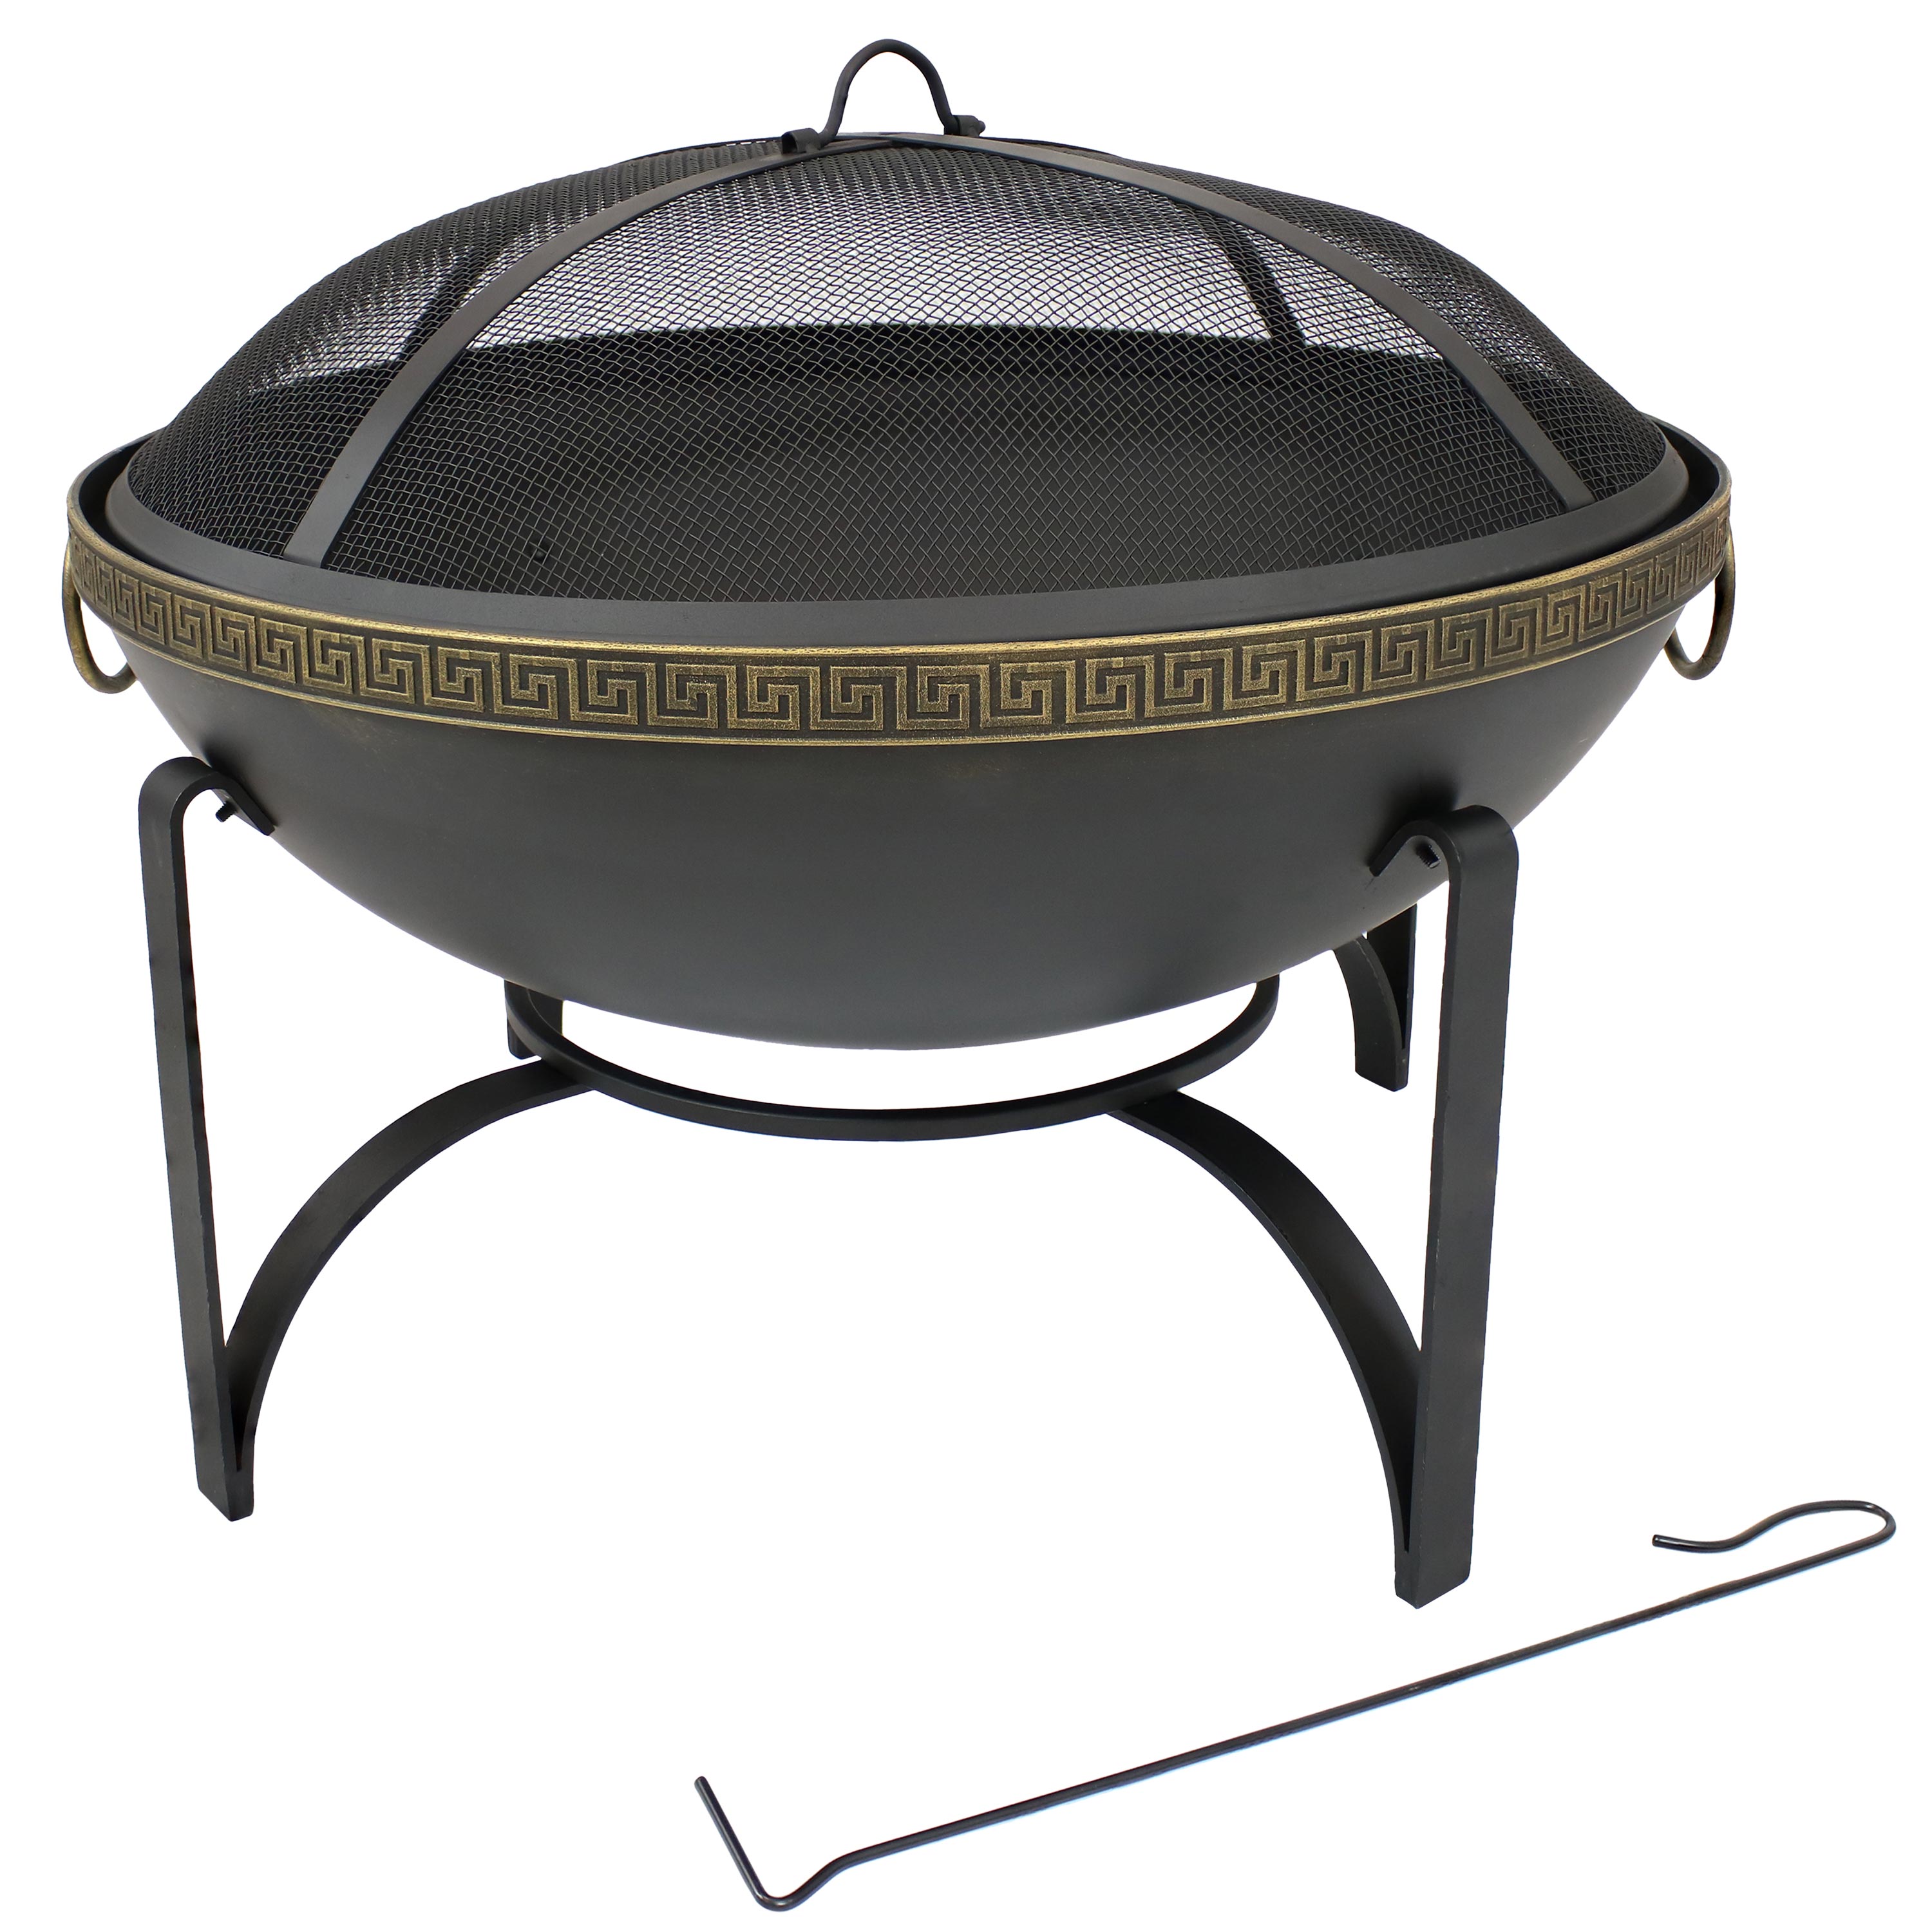 Black Steel Wood Burning Fire Pit, 26 Inch Fire Pit